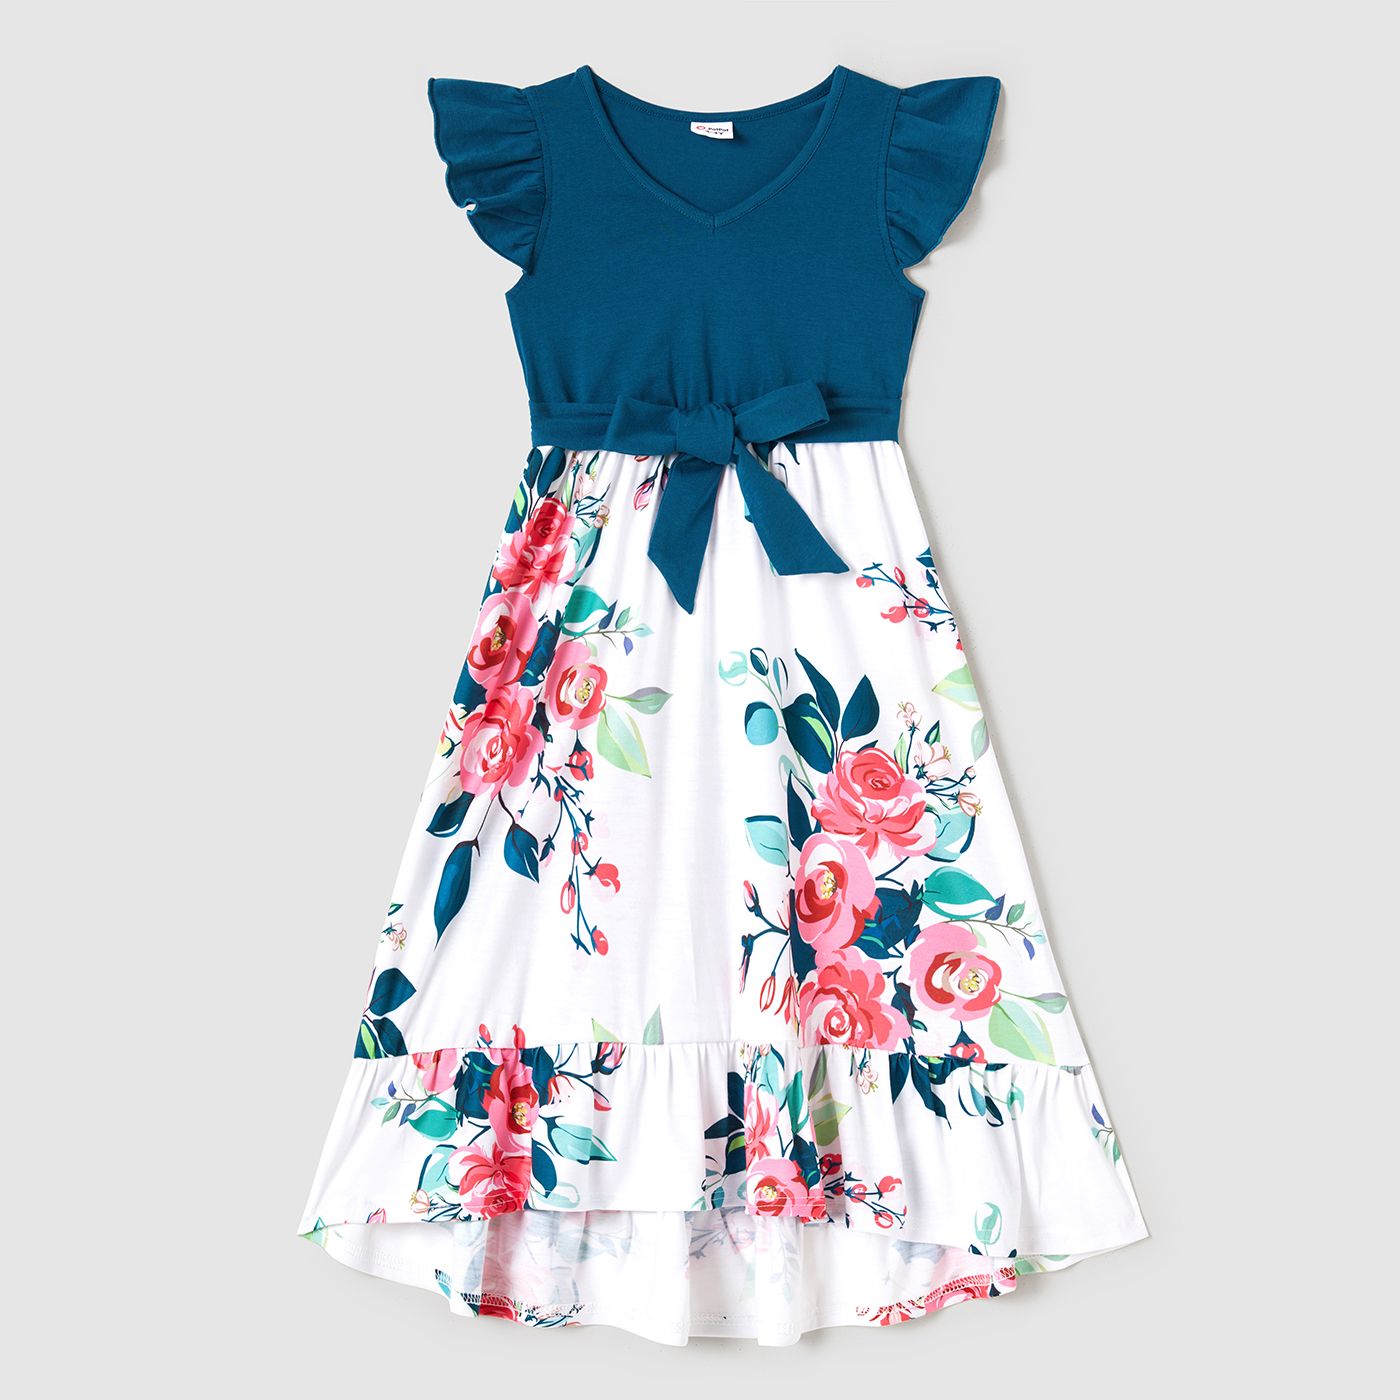 Family Matching Solid V Neck Flutter-sleeve Splicing Floral Print Dresses And Short-sleeve Colorblock T-shirts Sets